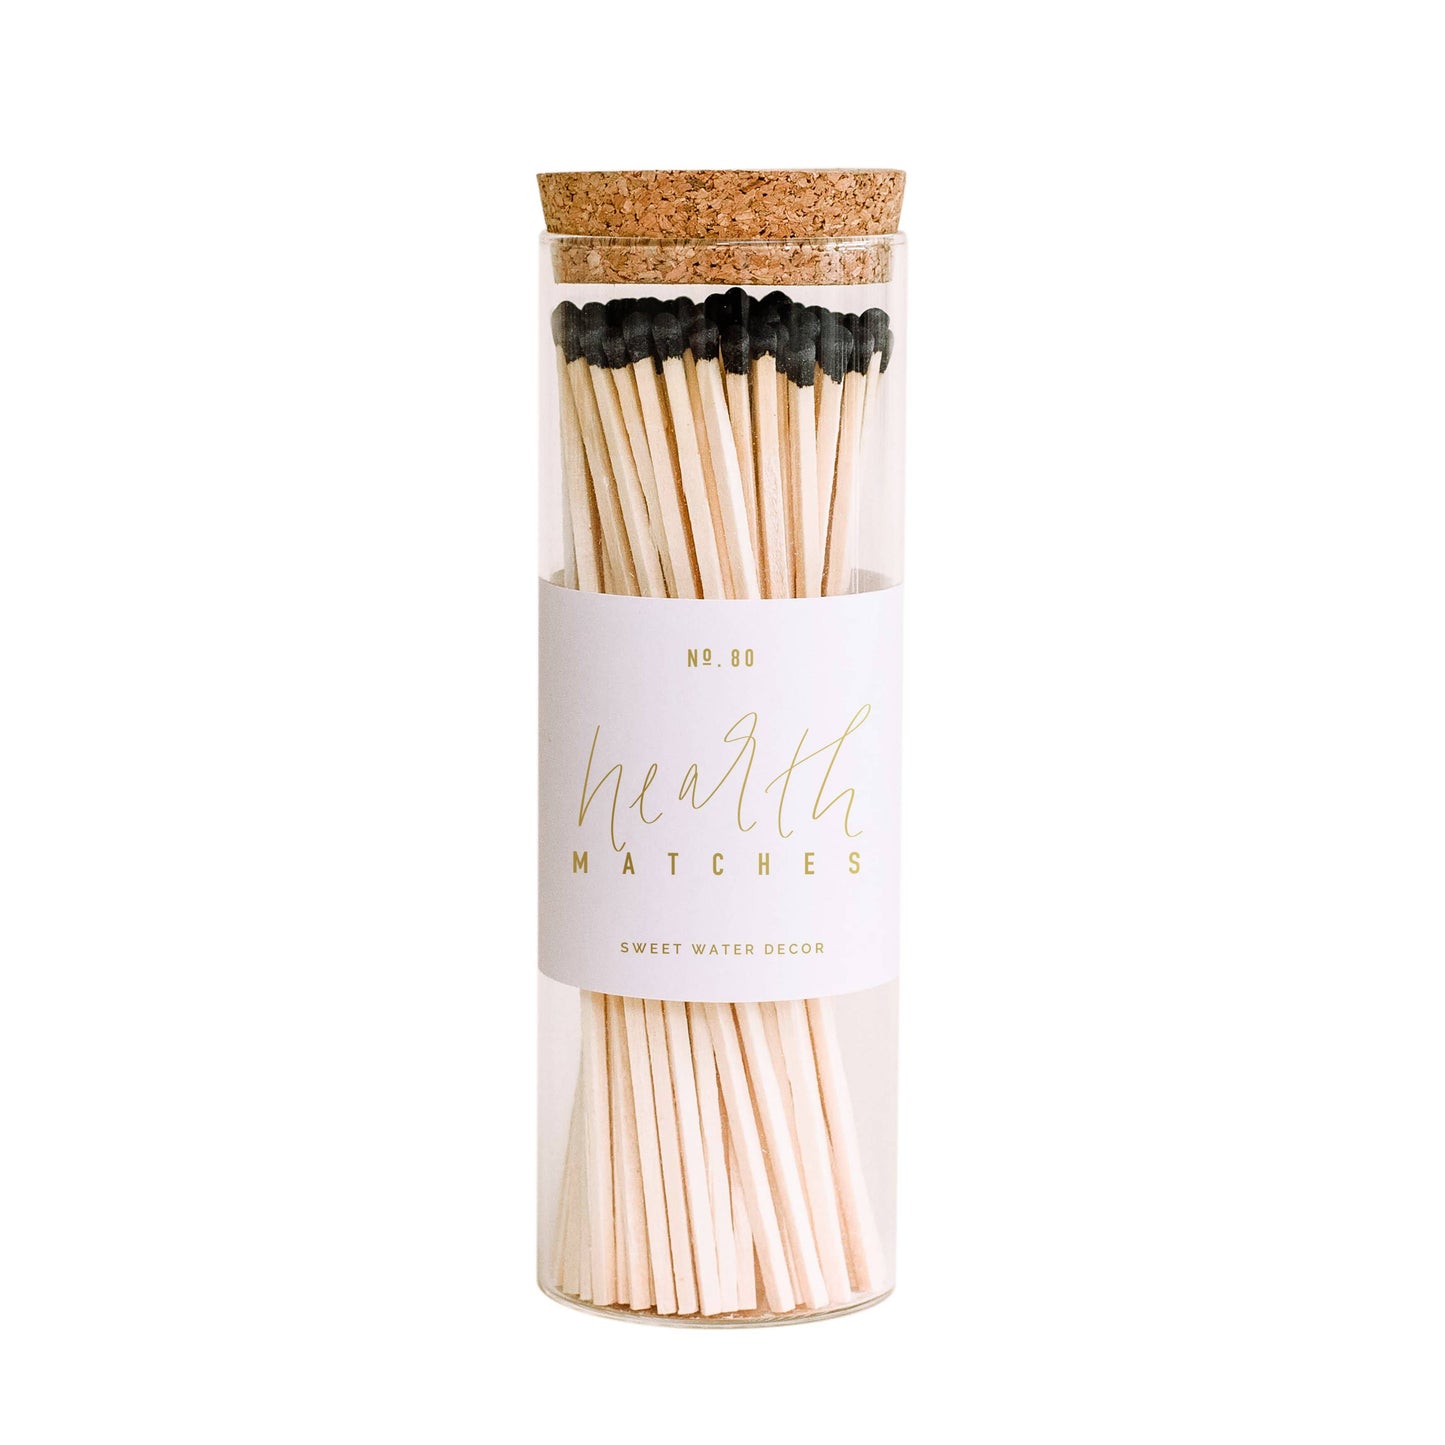 Hearth Matches, Black Tip - Home Decor & Gifts